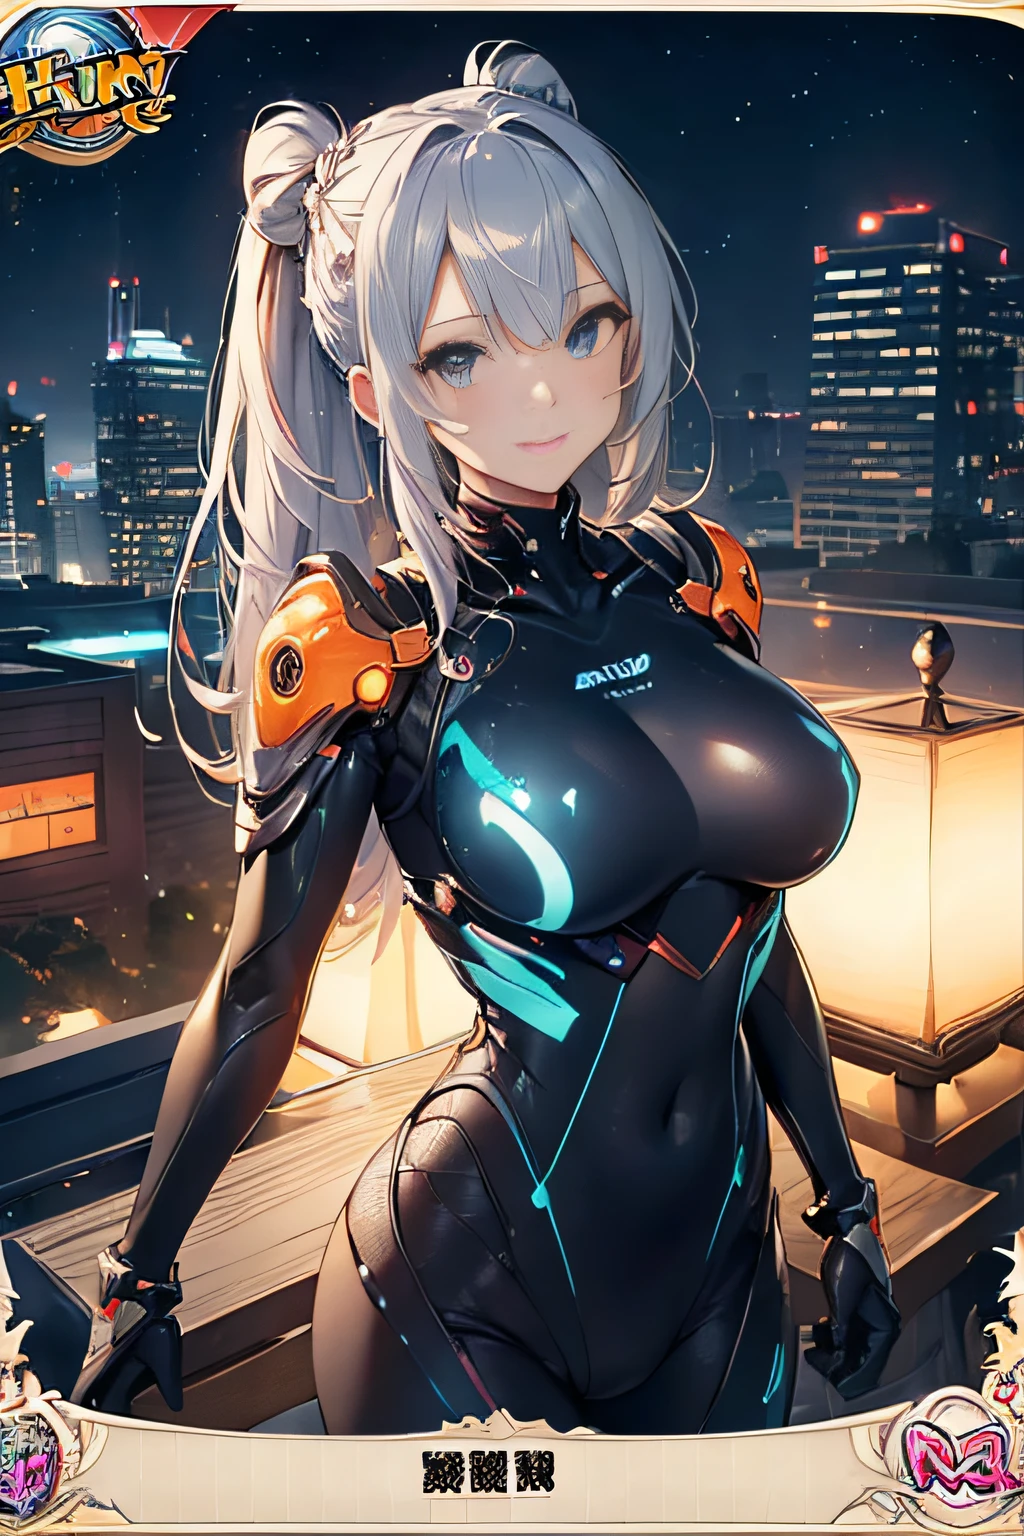 (Trading Card Game Frames:1.7),Cute round face,Cute smile,large full breasts,Dark fantasy world view,Cyber City at Night,(Gorgeous night view illumination:1.3),(a girl standing at the rooftop of a building:1.3).(Sexy super shiny orange transparent holographic mechanical cyberpunk suit:1.3) ,(Mechanical suit that shines with colorful lightning:1.3),Sexy face, a necklace,piercings, Happy smile.Sexy Pose, (Silver hair、Ponytail twisted buns adorned with elaborate braids and beads,Braided Setup Fishbone Hair,),(Bangs are see-through bangs),(hair pin、poneyTail、Floating hair、),breast slip,(Emphasis on large breasts:1.3),Professional Lighting,Cinematic Light,(masutepiece,top-quality,Ultra-high resolution output image,) ,(The 8k quality,),(Sea Art 2 Mode:1.3),,(Image Mode Ultra HD,)